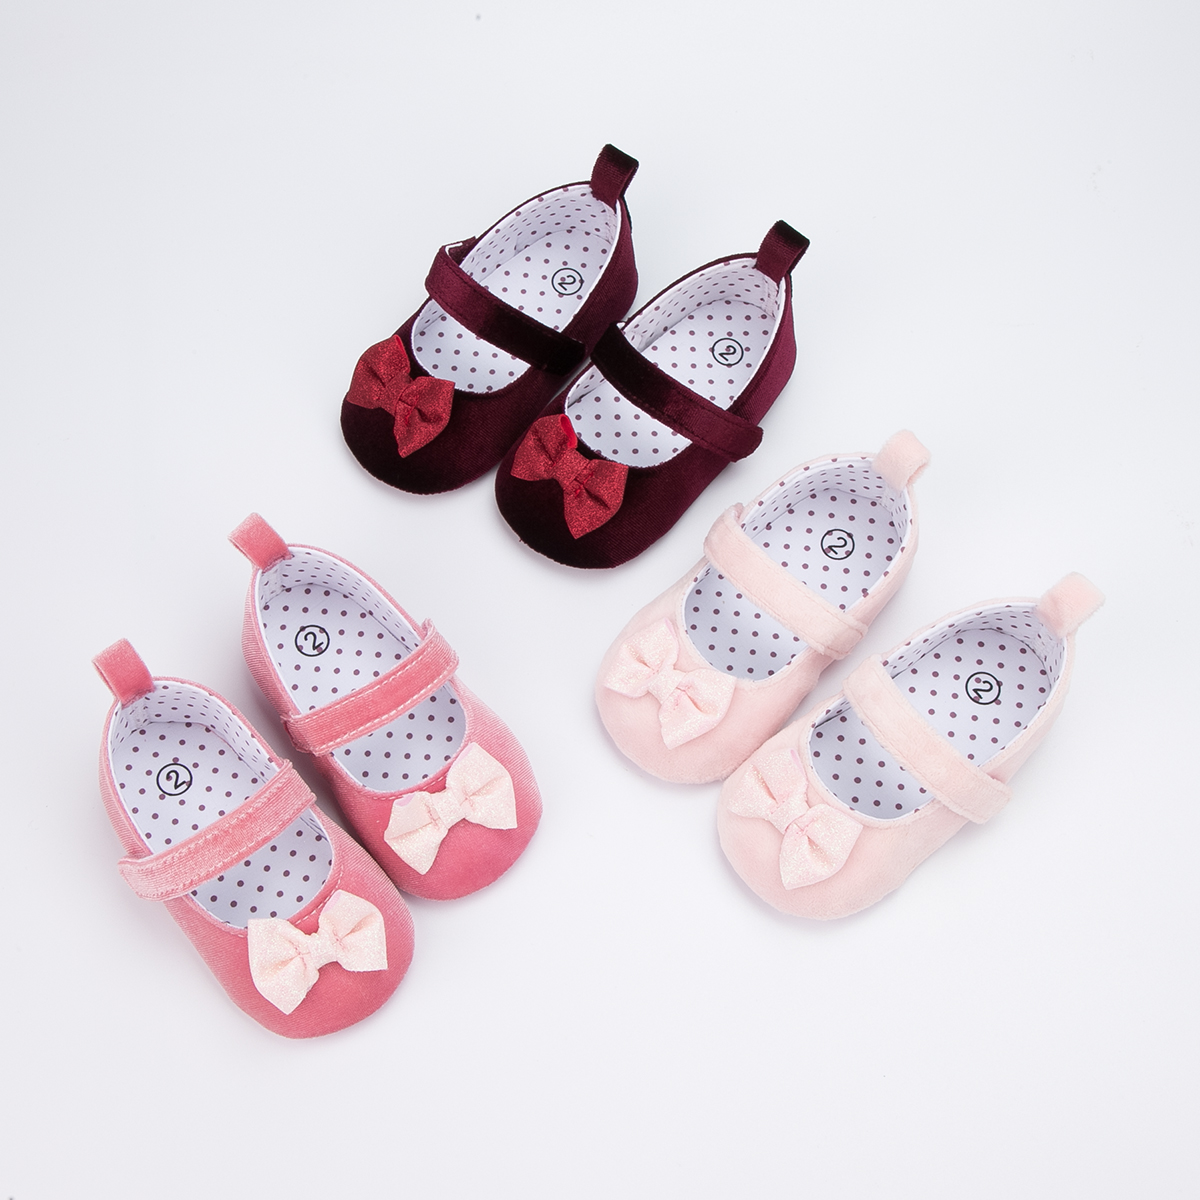 Non-slip Princess shoes for infants and toddlers